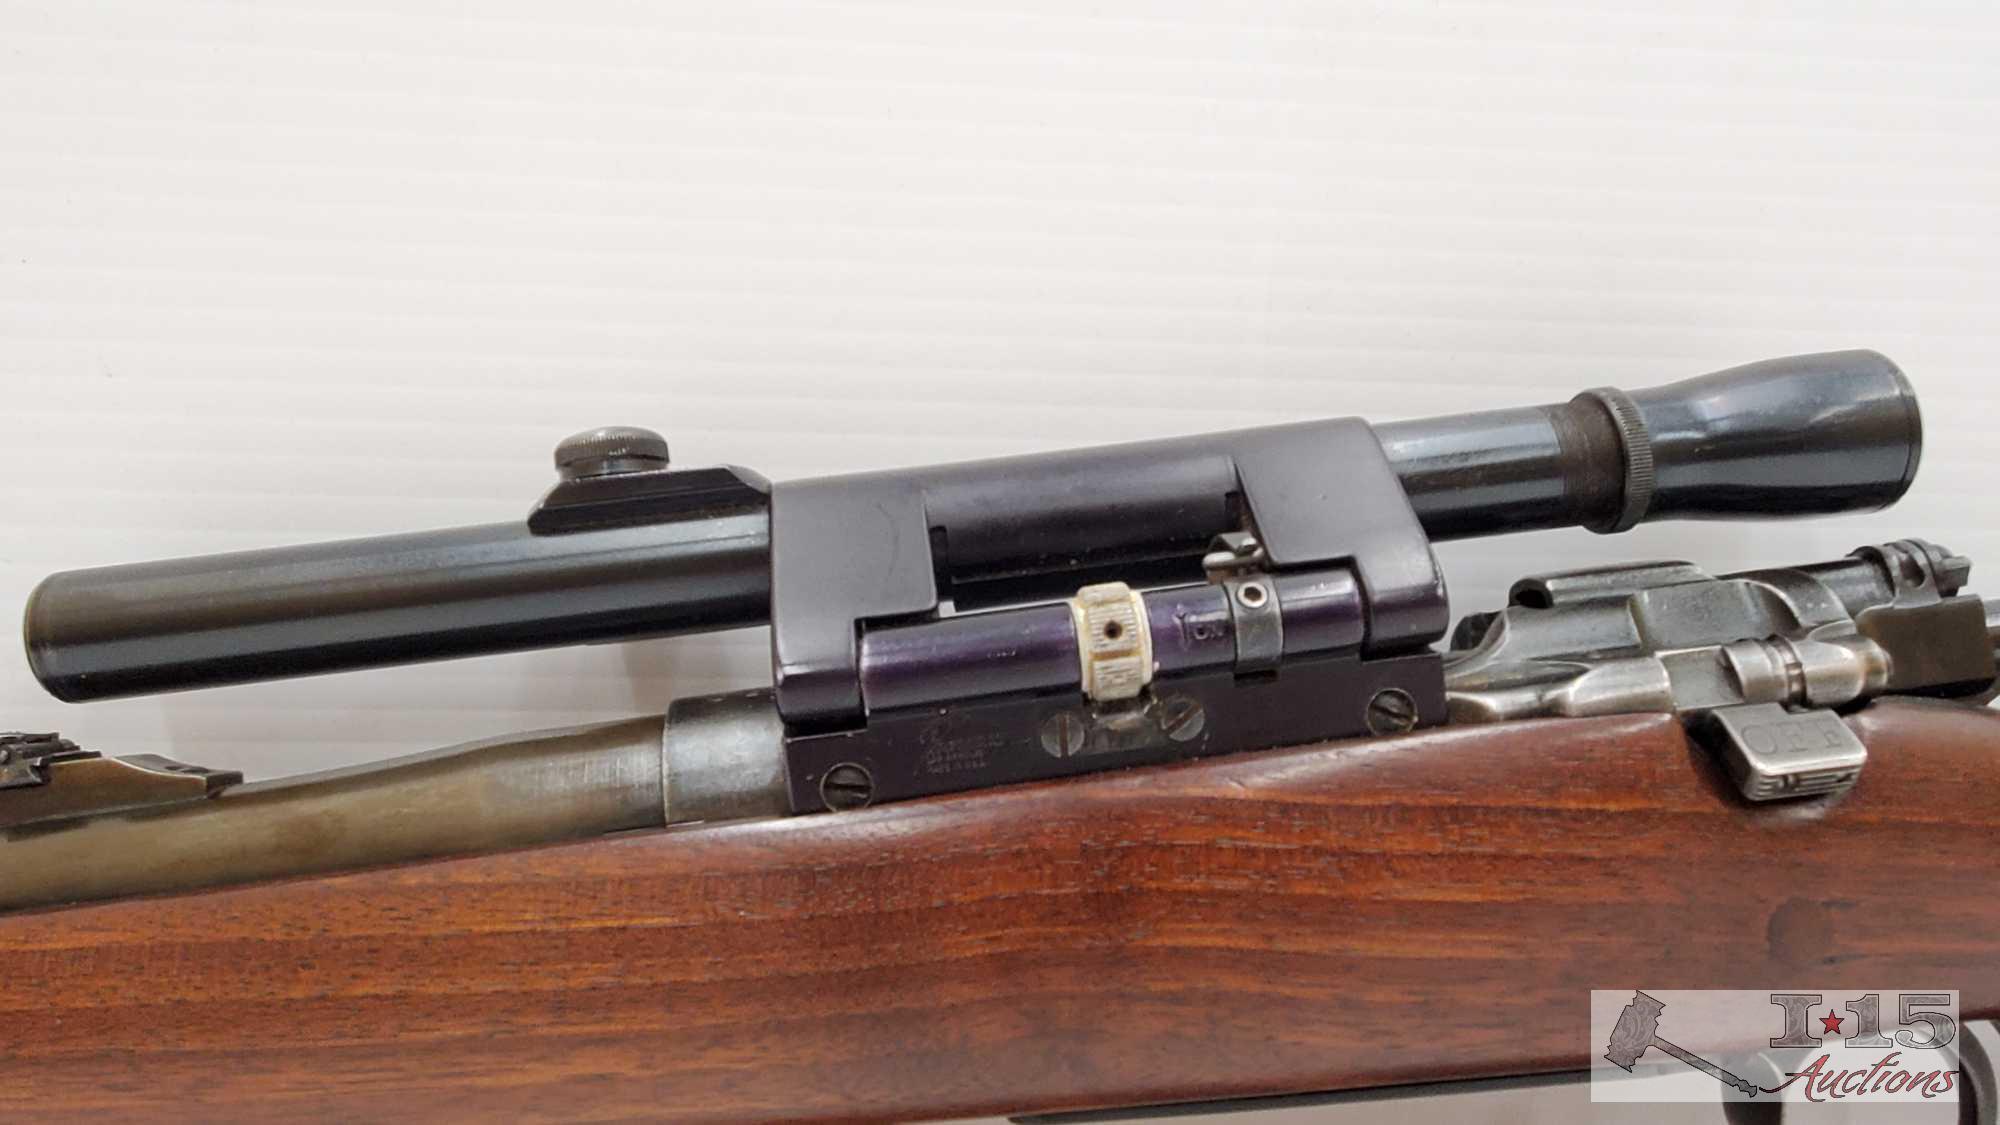 Springfield Armory 1903 7mm Bolt Action Rifle with Scope